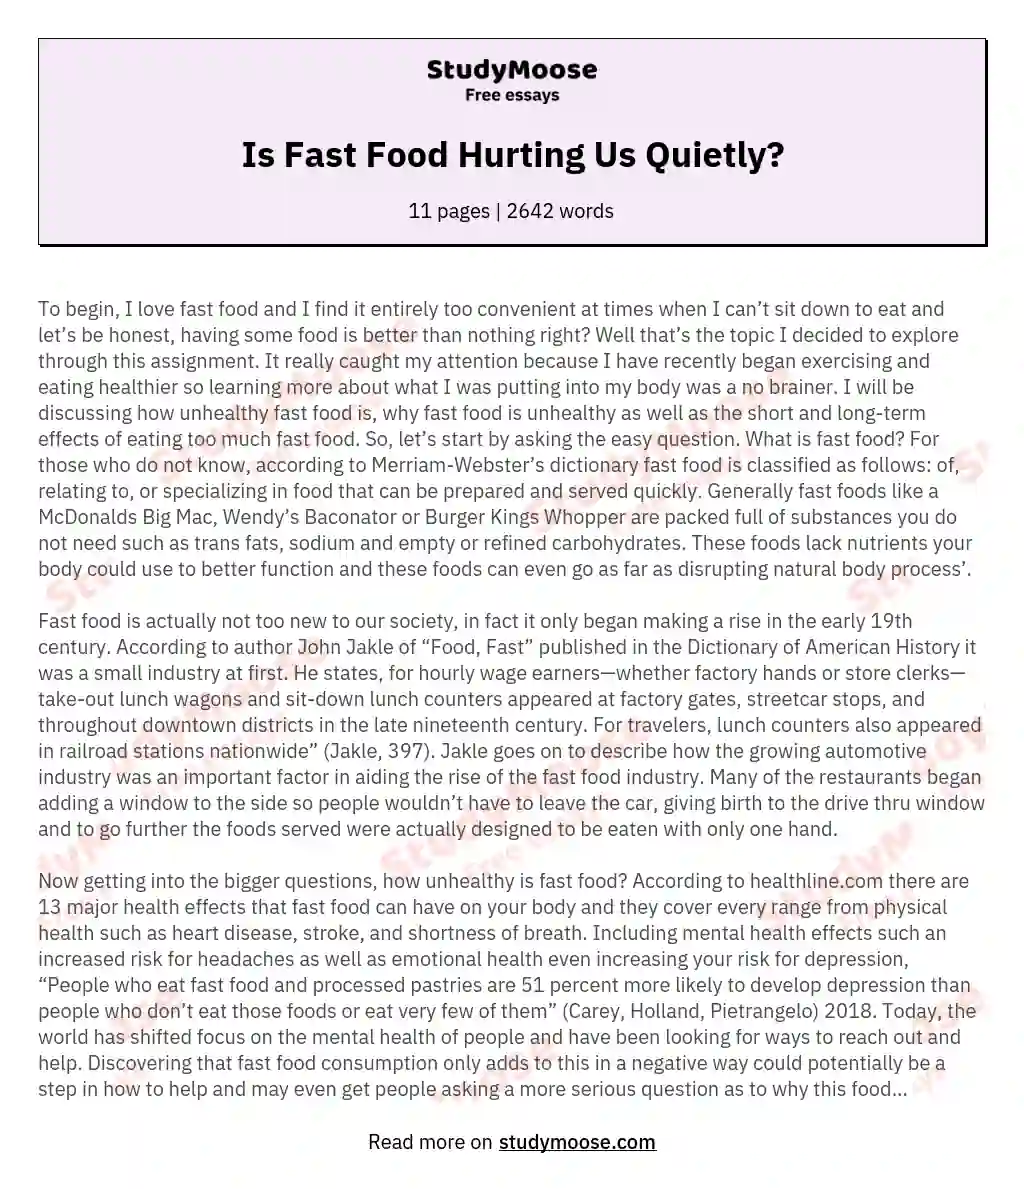 Is Fast Food Hurting Us Quietly? essay